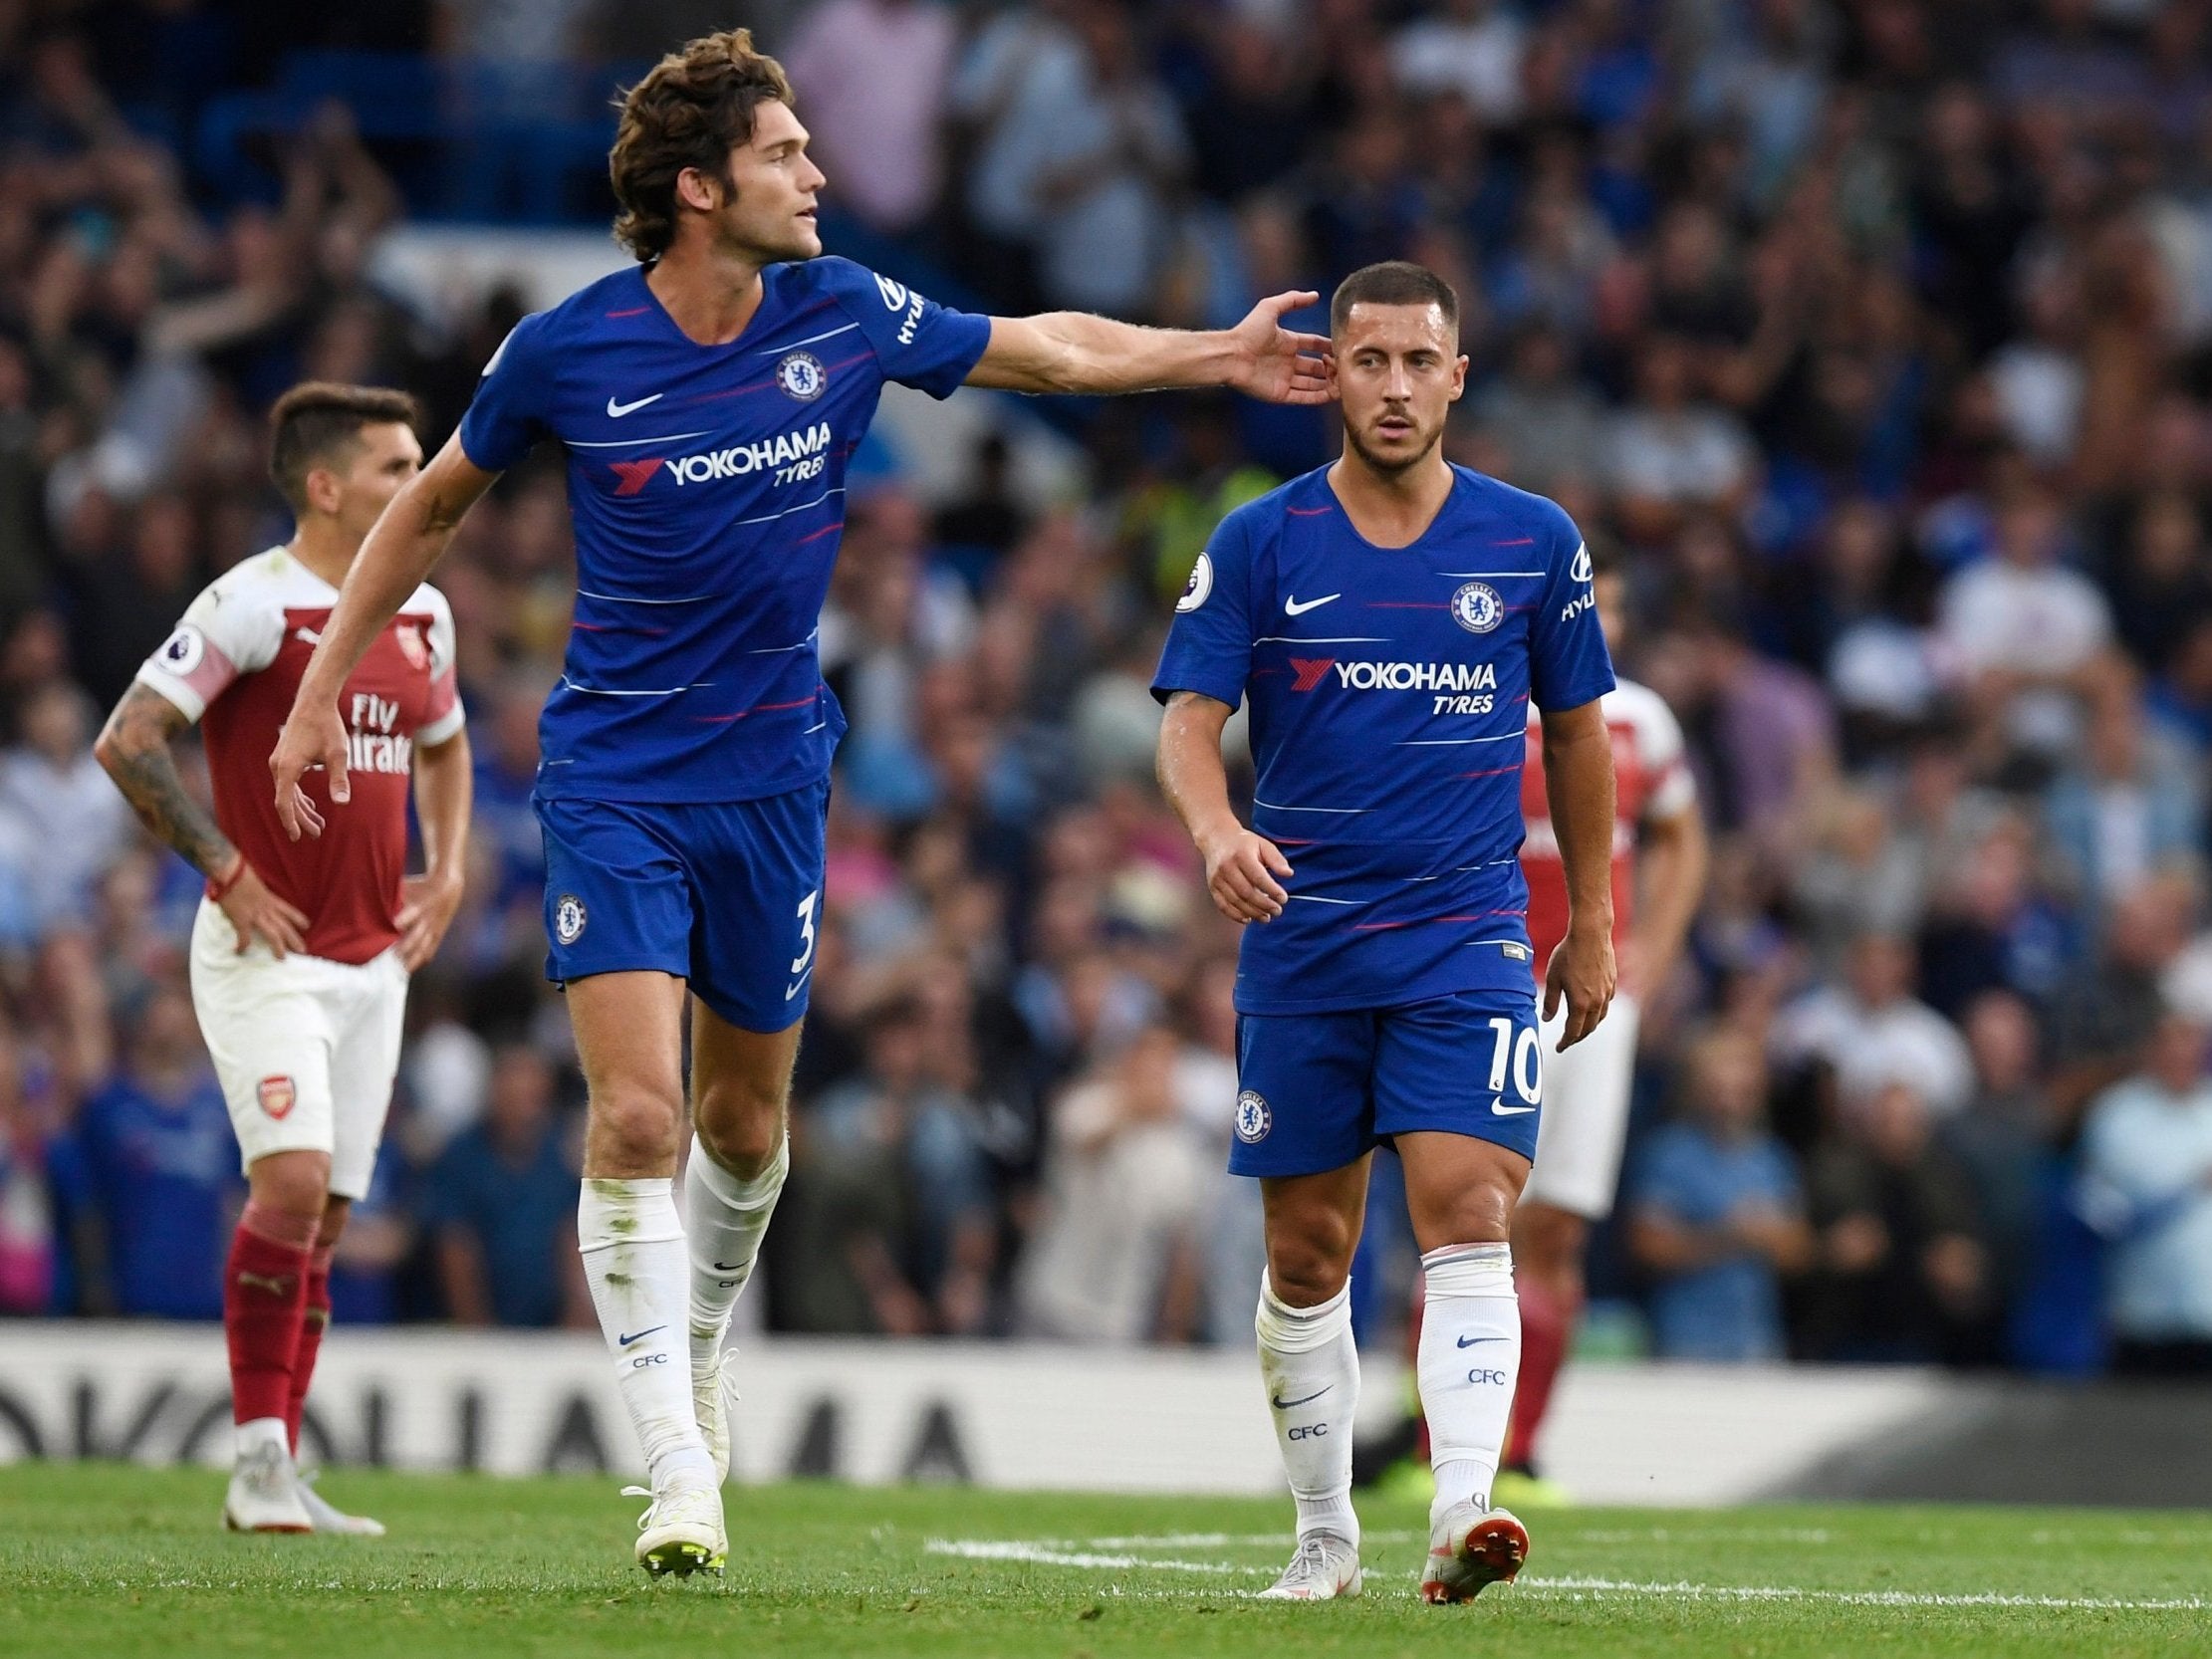 Eden Hazard set-up the winner for Marcos Alonso to see off Arsenal